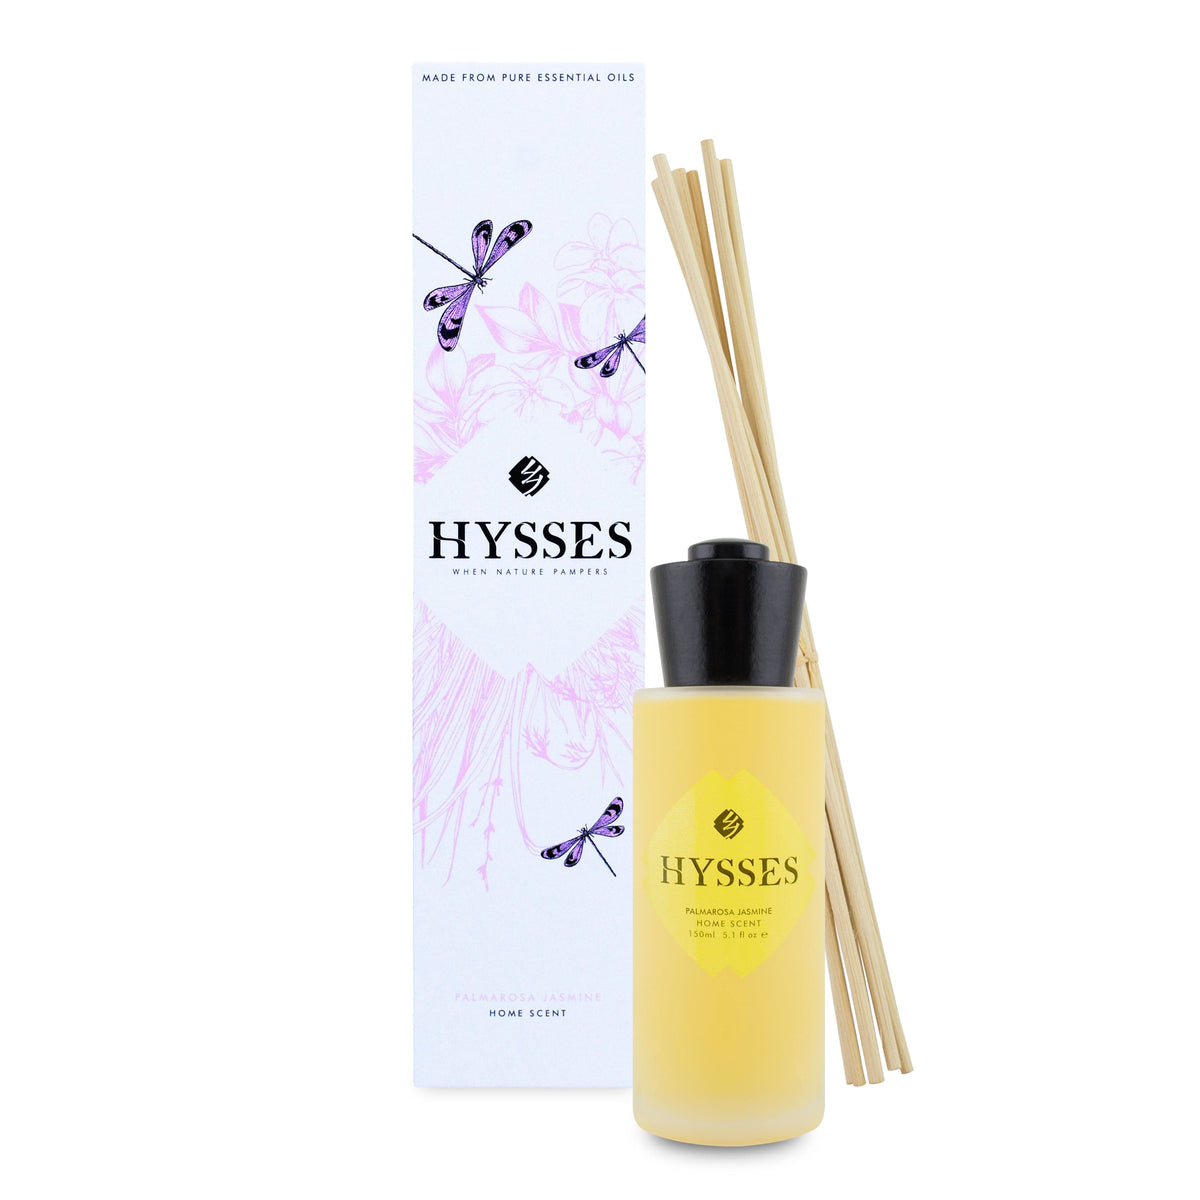 Hysses Home Scents 150ml Home Scent Reed Diffuser Palmarosa Jasmine